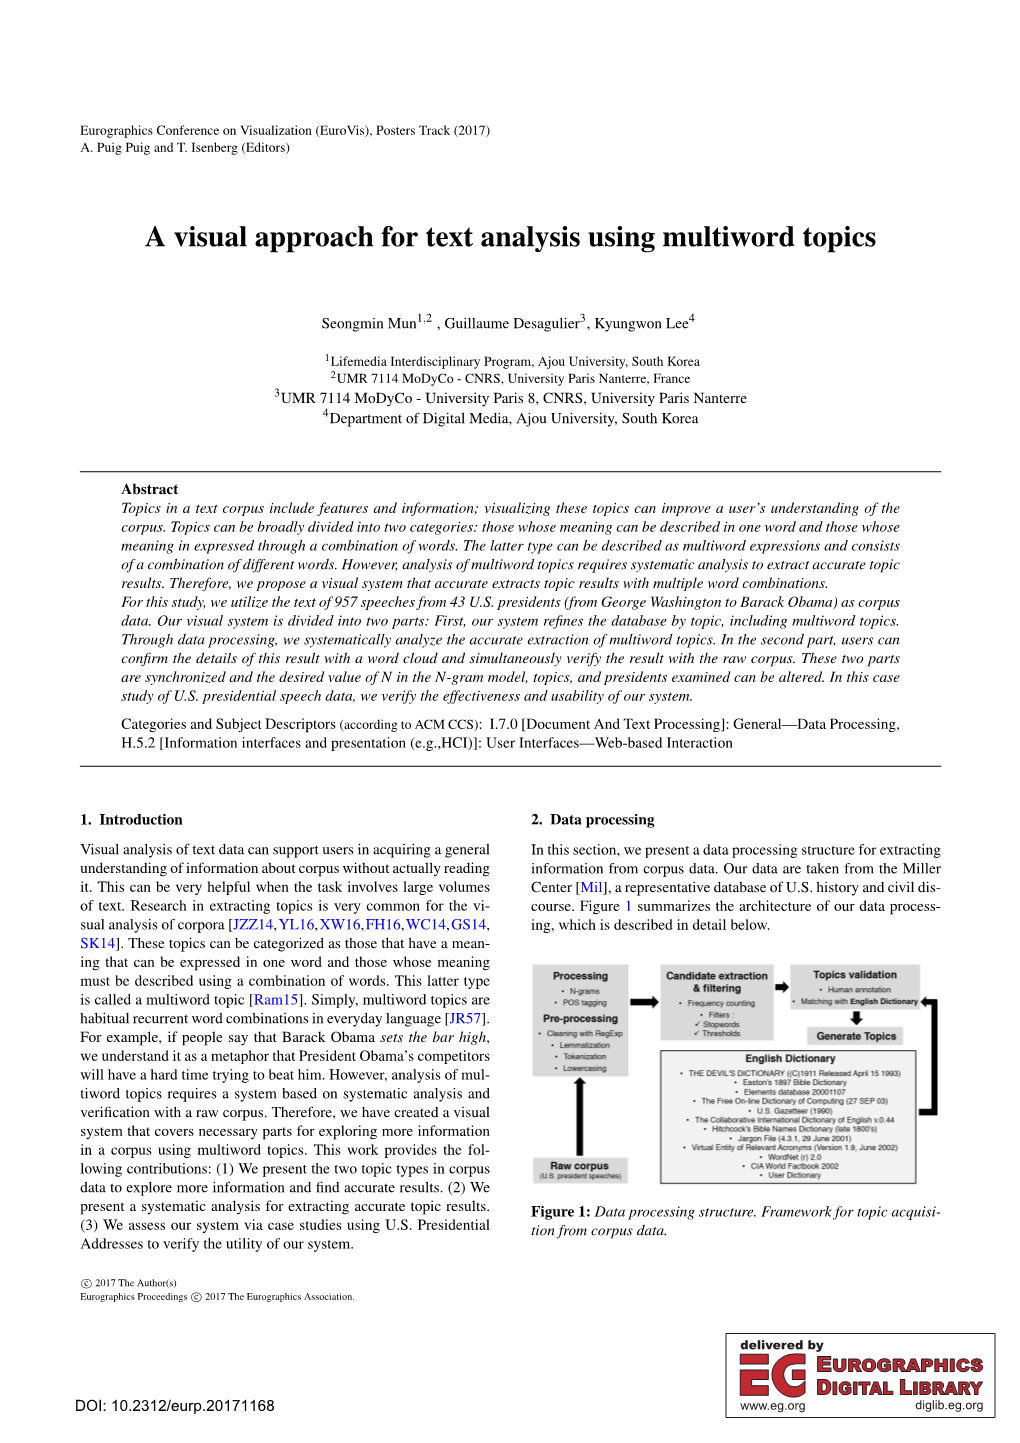 A Visual Approach for Text Analysis Using Multiword Topics